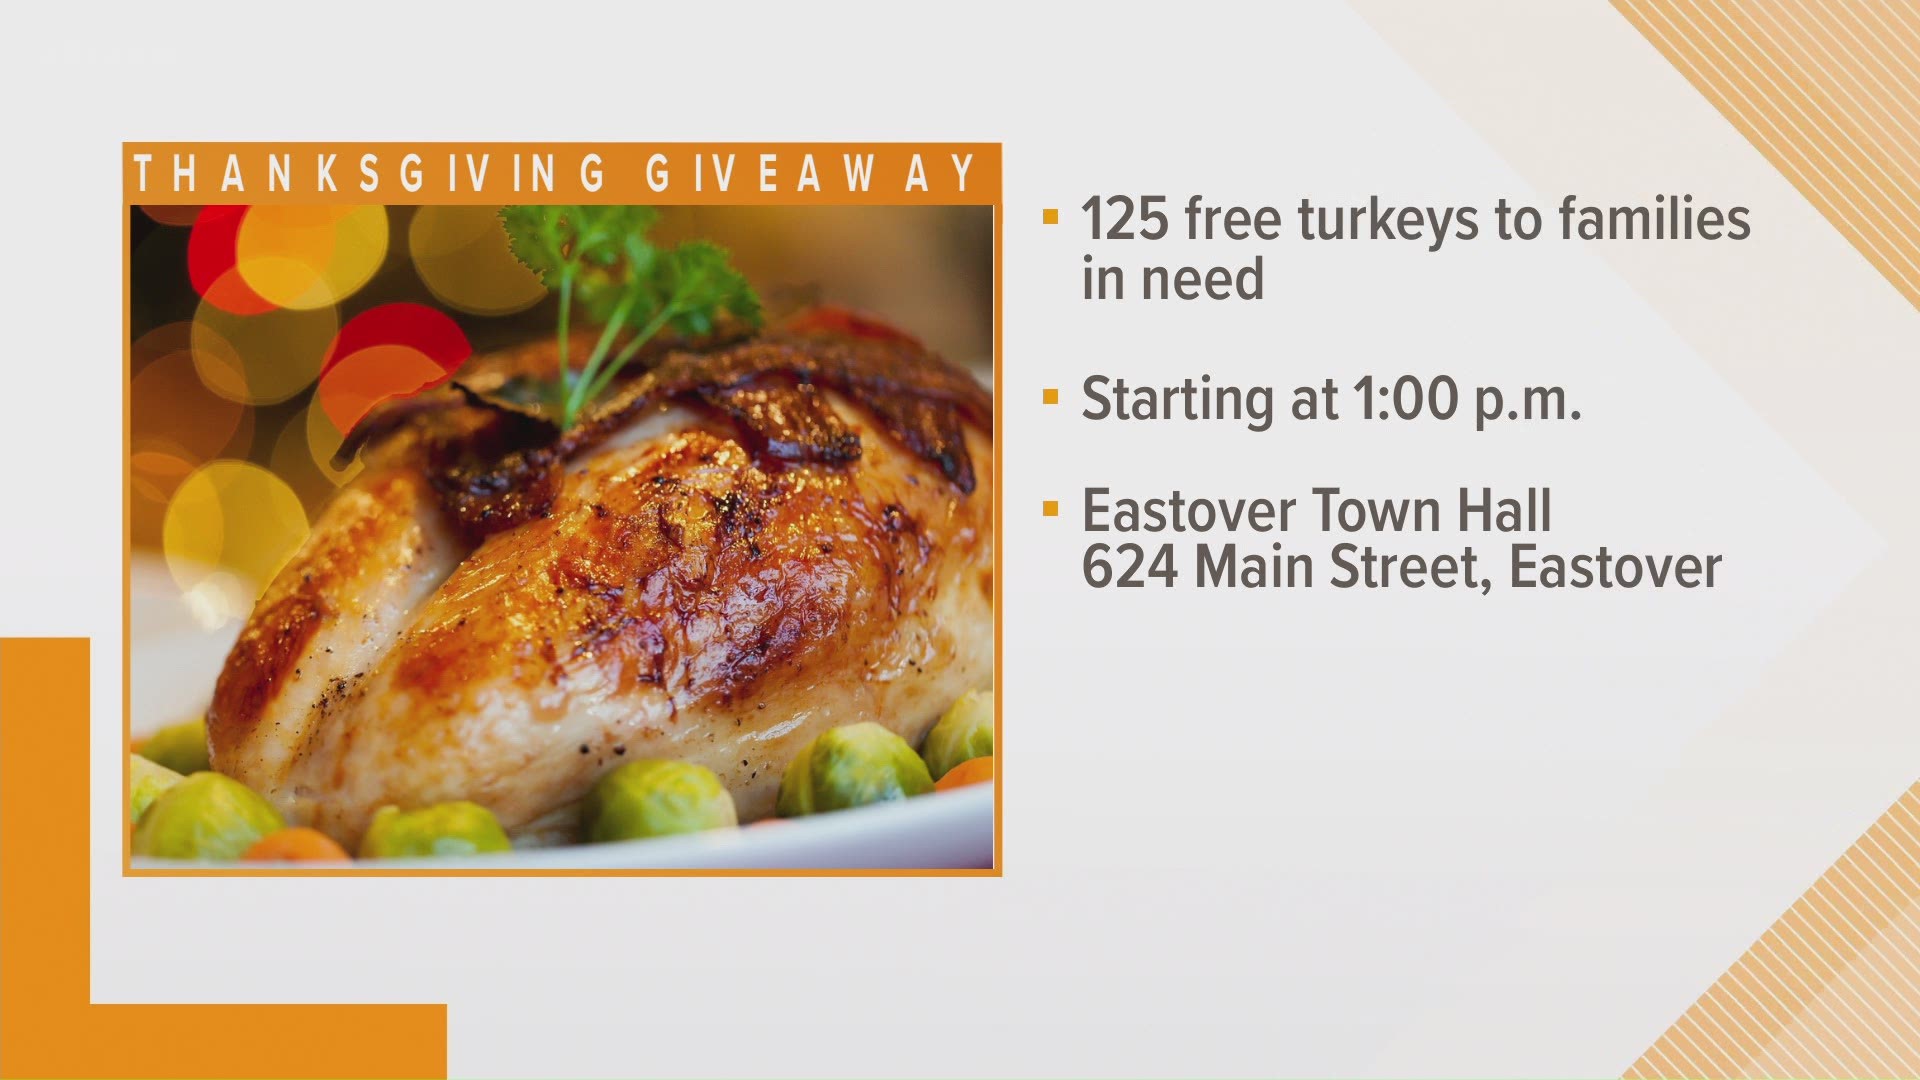 A Columbia law firm is hosting a turkey giveaway in Eastover on November 19, 2020